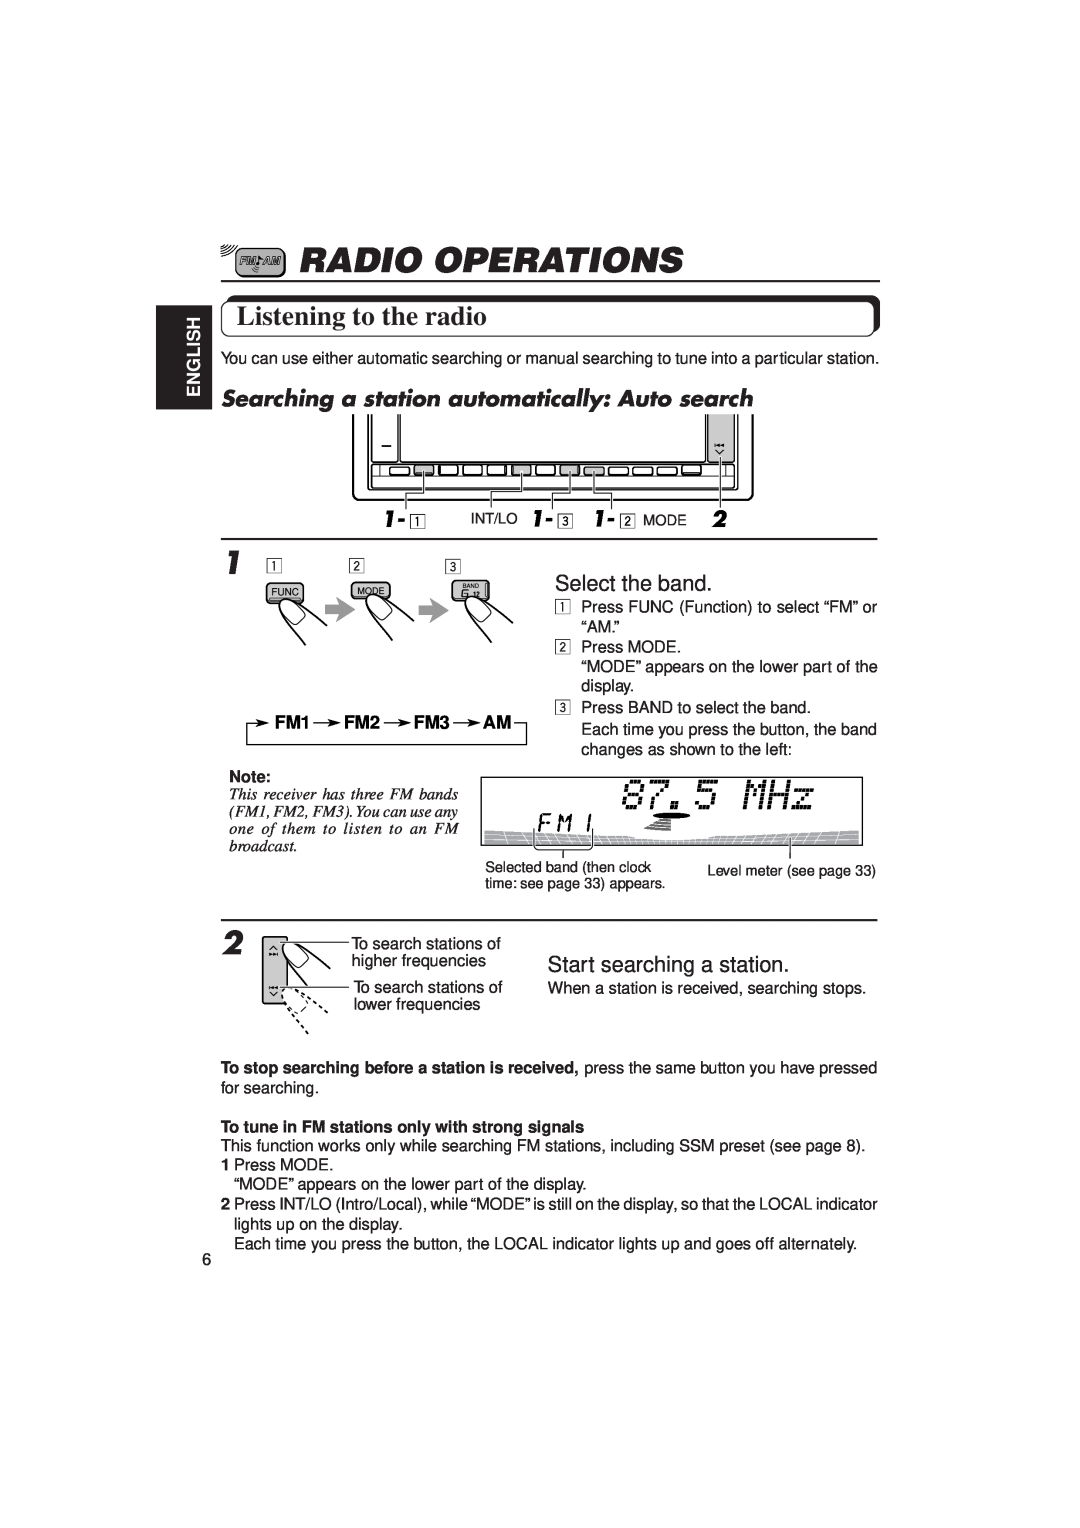 JVC KD-LX3R Radio Operations, Listening to the radio, Select the band, Start searching a station, English, FM1 FM2 FM3 AM 